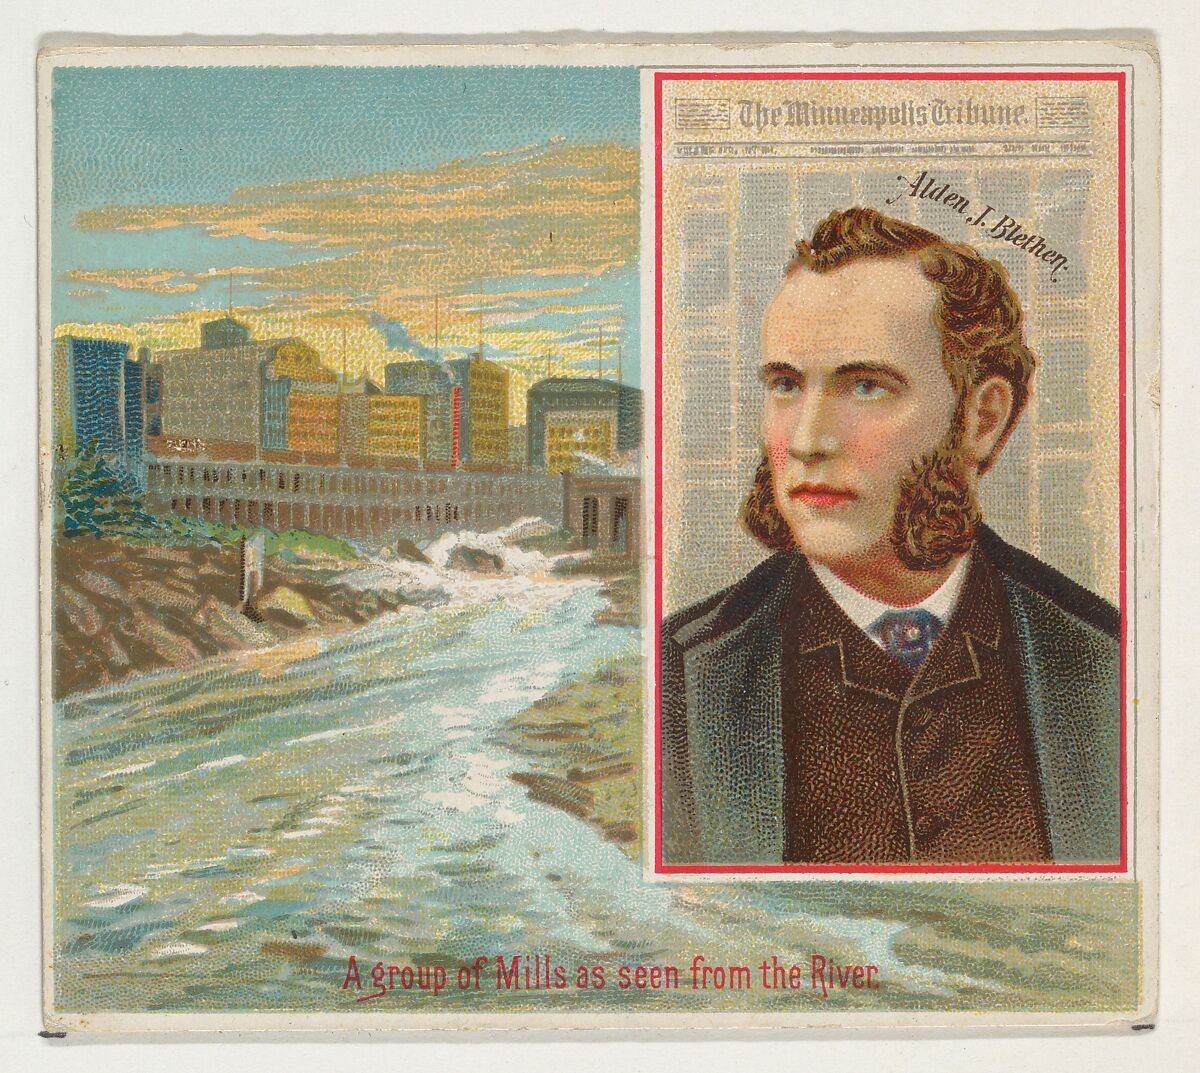 Alden J. Blethen, The Minneapolis Tribune, from the American Editors series (N35) for Allen & Ginter Cigarettes, Issued by Allen &amp; Ginter (American, Richmond, Virginia), Commercial color lithograph 